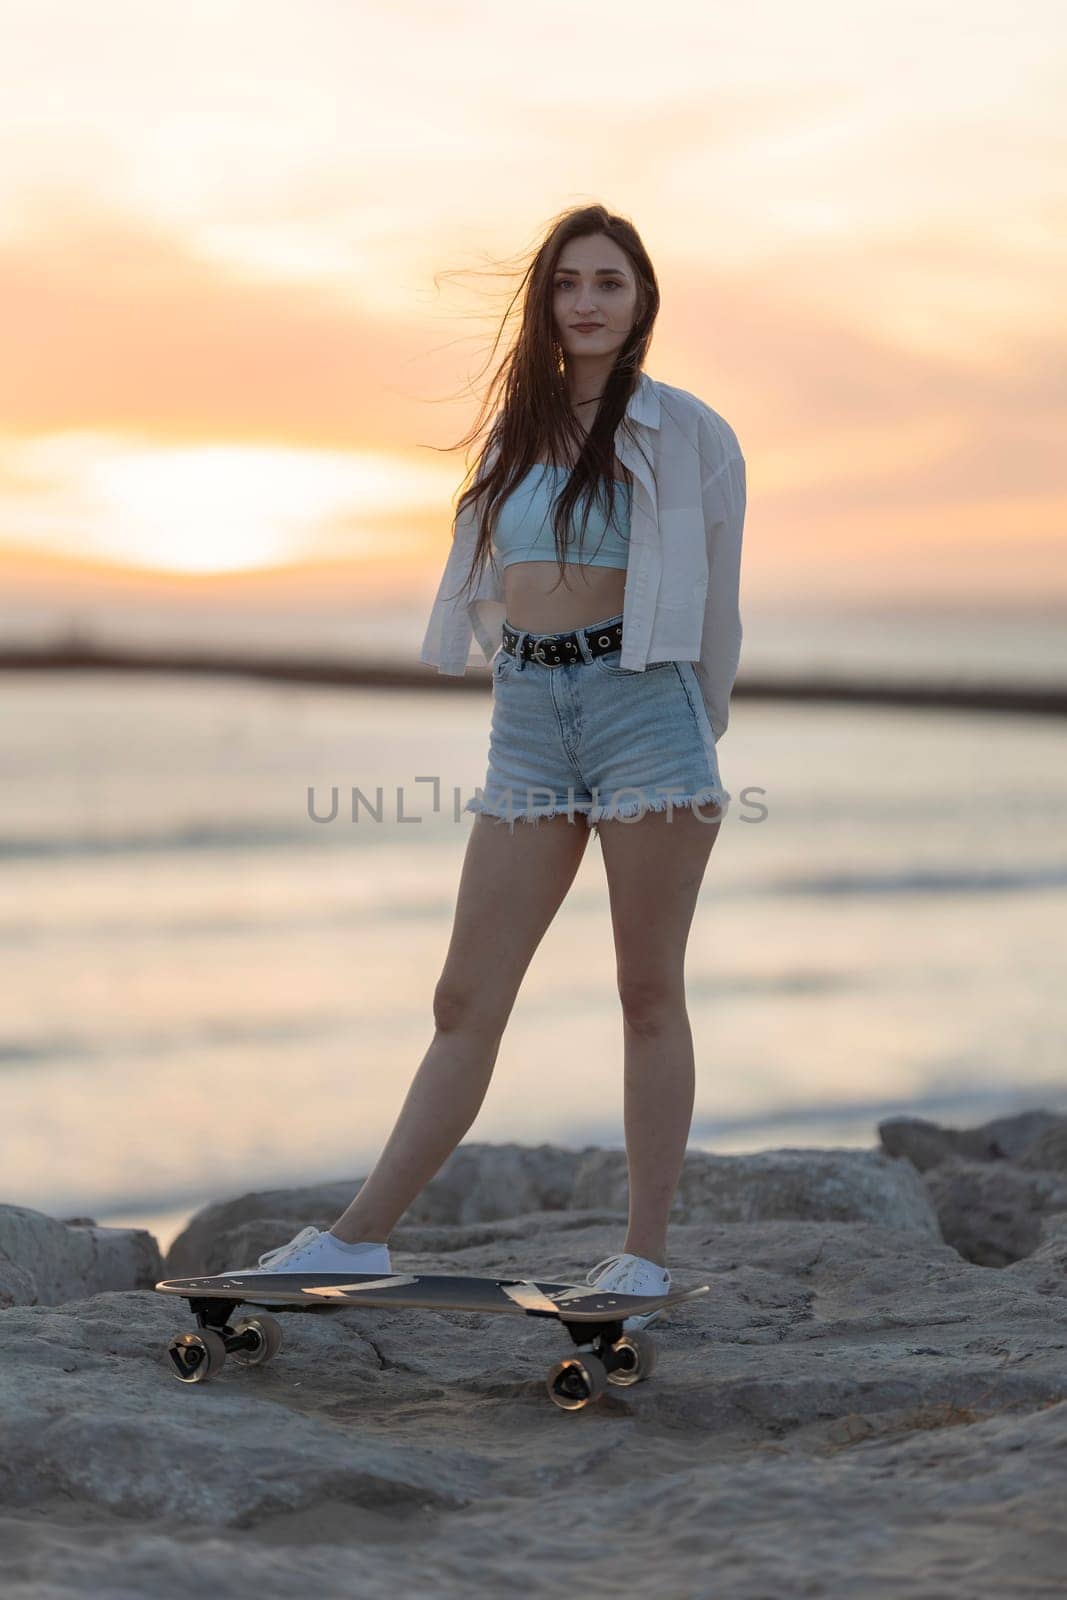 A woman is standing on a skateboard on a beach. The sky is orange and the water is calm